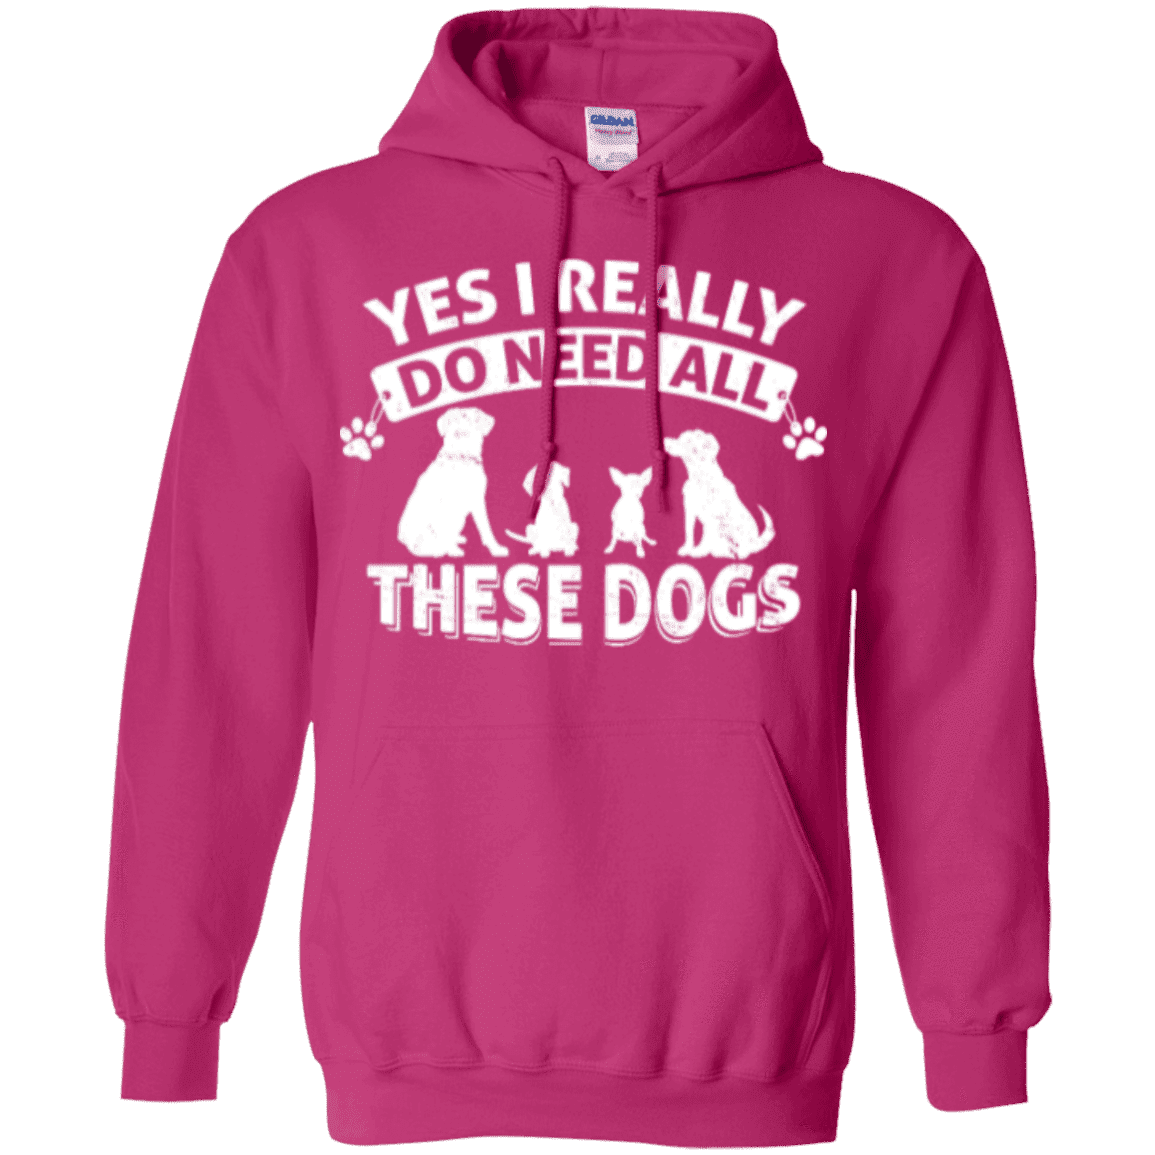 Yes I Need All These Dogs - Hoodie – Rescuers Club